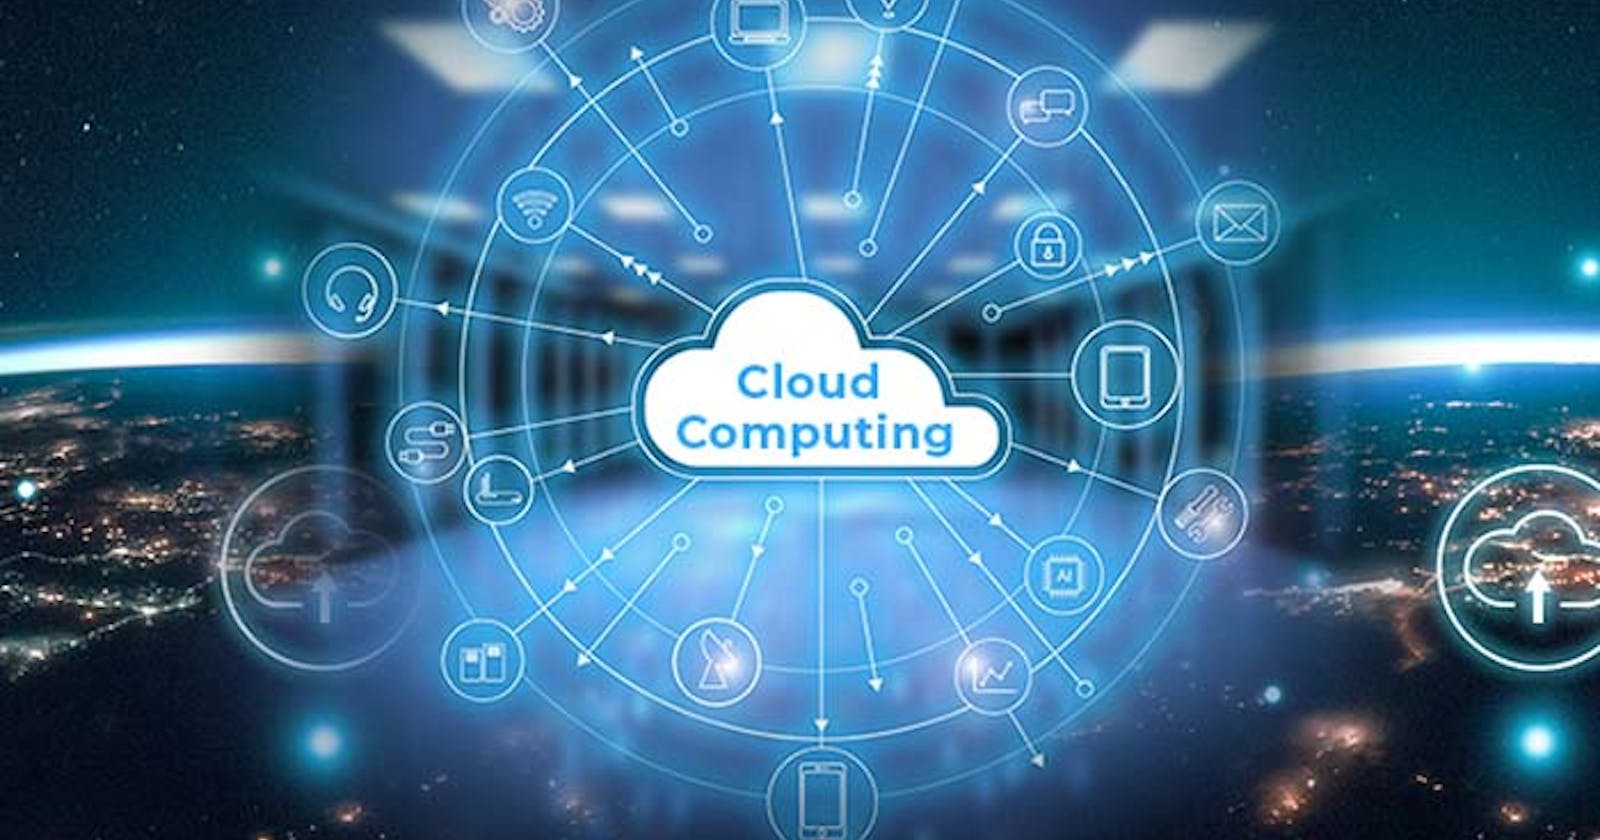 Learn Cloud Computing from Scratch